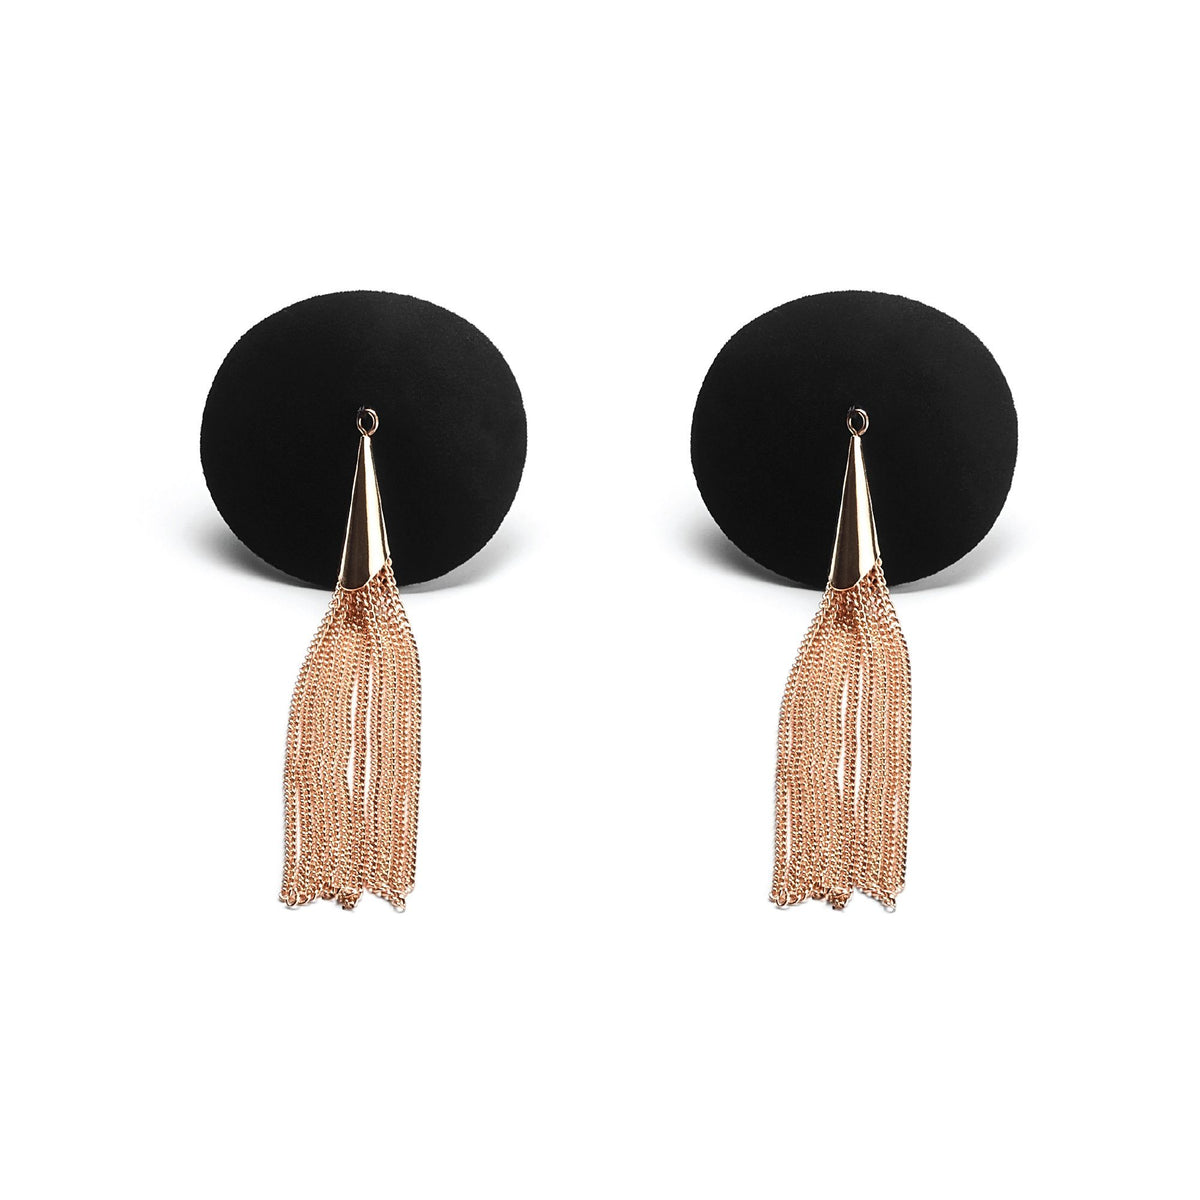 Vinyl Pasties with Rose Gold Tassels at The Cowgirl Shop